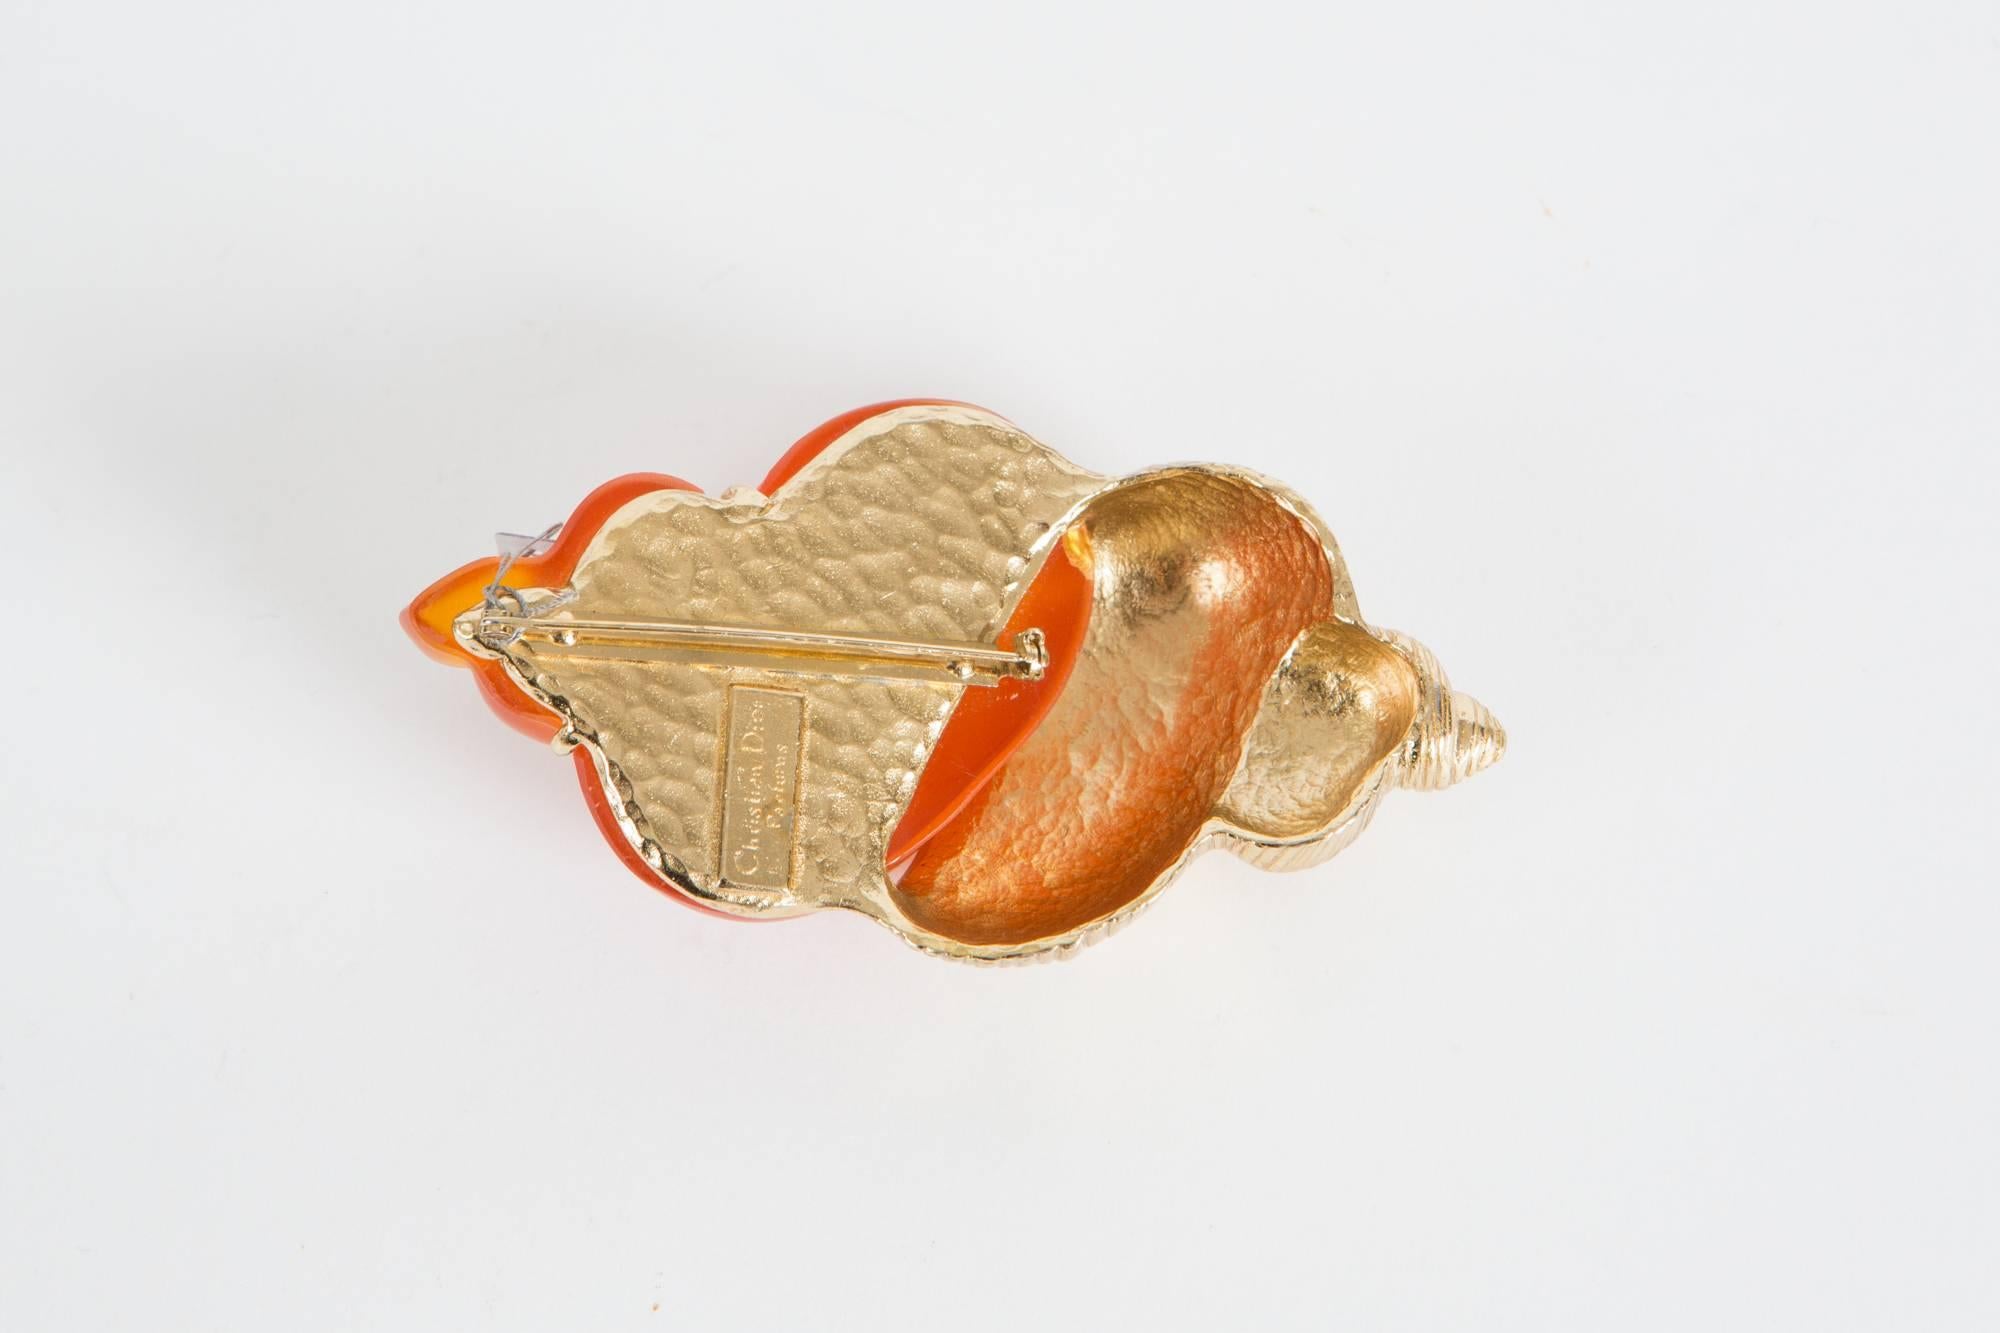 1987 Christian Dior rare brooch created in limited edition by  parurier Robert Goossens for the launch of the perfume 